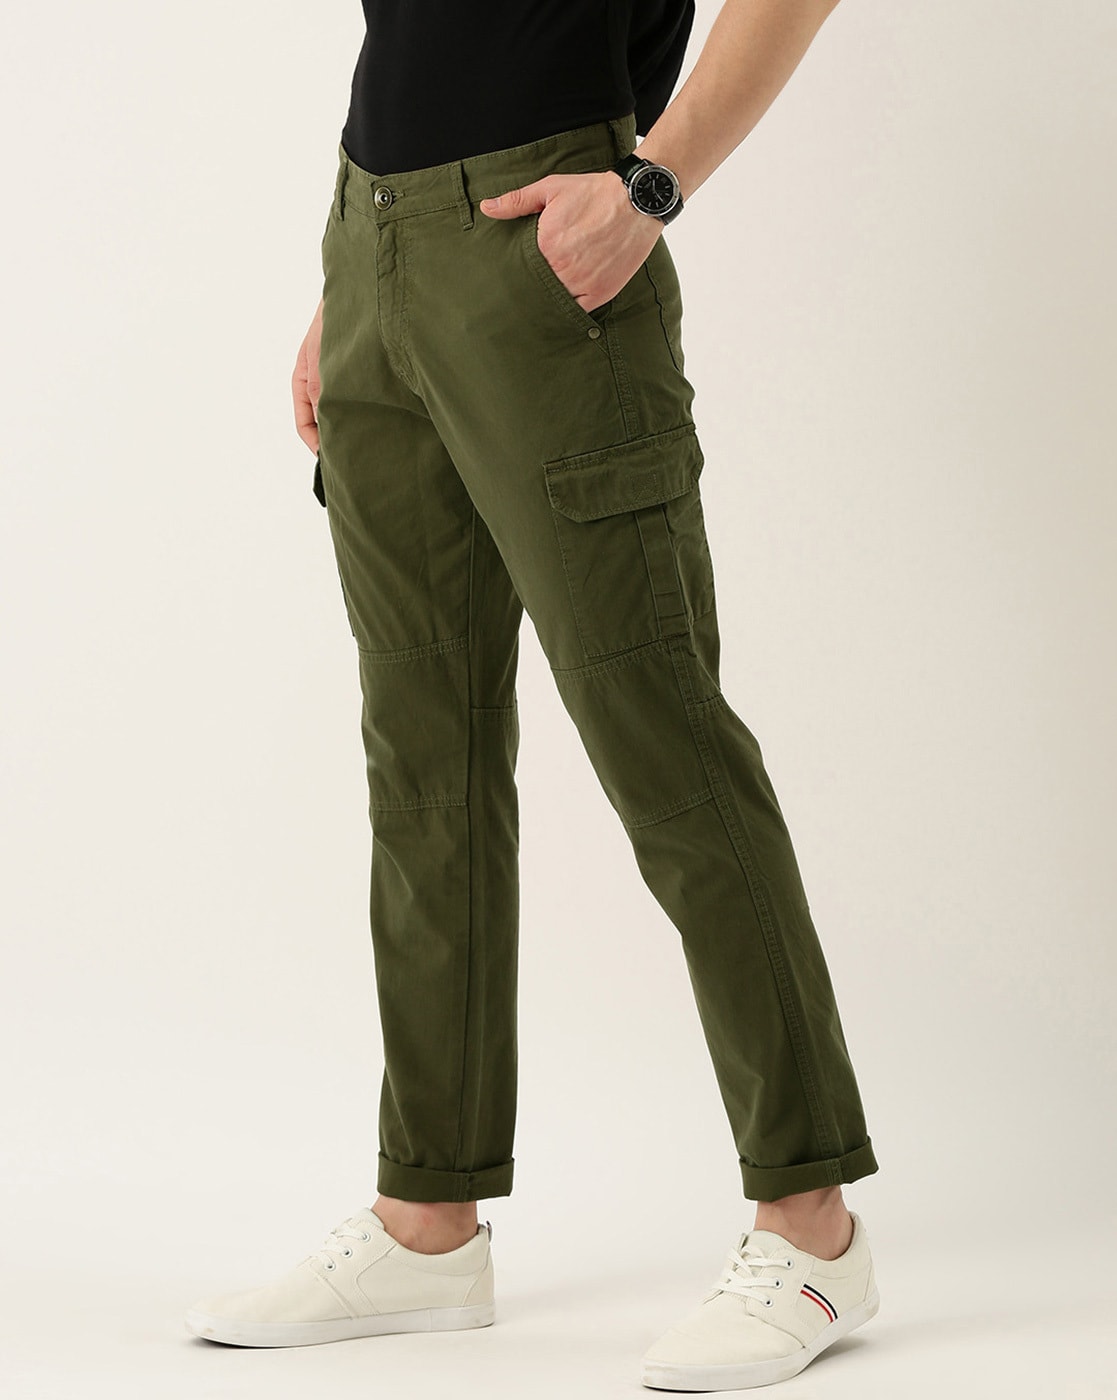 LASTINCH All Sizes Solid Color Block Green Palazzo Pants